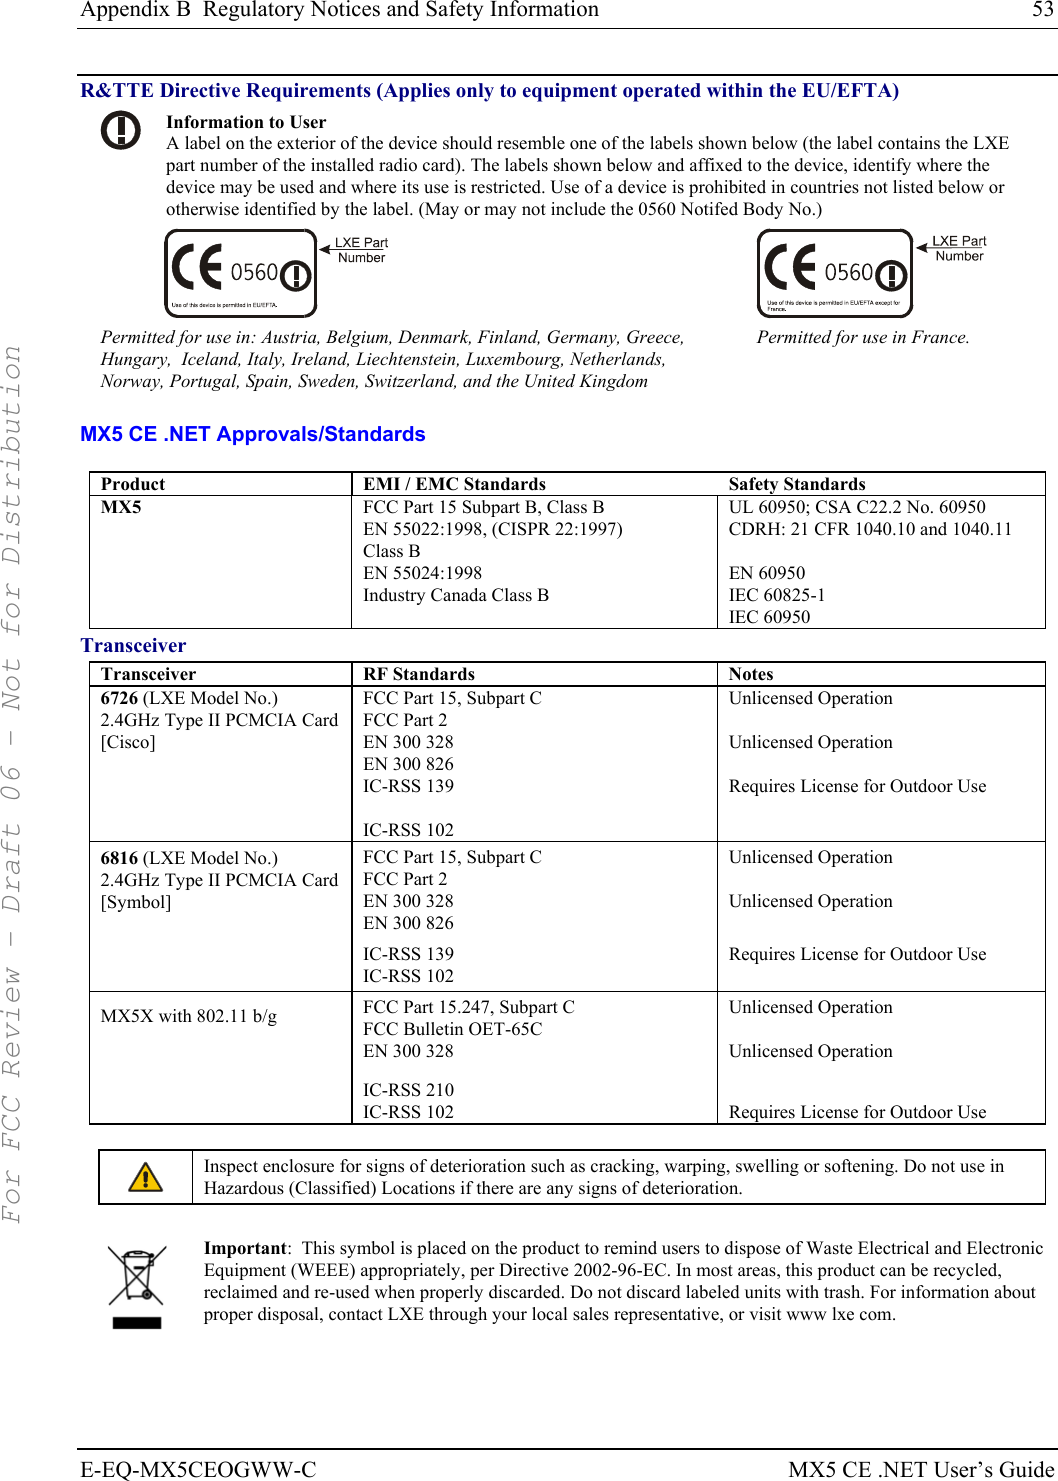 Appendix B  Regulatory Notices and Safety Information  53 E-EQ-MX5CEOGWW-C  MX5 CE .NET User’s Guide R&amp;TTE Directive Requirements (Applies only to equipment operated within the EU/EFTA)  Information to User A label on the exterior of the device should resemble one of the labels shown below (the label contains the LXE part number of the installed radio card). The labels shown below and affixed to the device, identify where the device may be used and where its use is restricted. Use of a device is prohibited in countries not listed below or otherwise identified by the label. (May or may not include the 0560 Notifed Body No.)   Permitted for use in: Austria, Belgium, Denmark, Finland, Germany, Greece, Hungary,  Iceland, Italy, Ireland, Liechtenstein, Luxembourg, Netherlands, Norway, Portugal, Spain, Sweden, Switzerland, and the United Kingdom Permitted for use in France. MX5 CE .NET Approvals/Standards  Product  EMI / EMC Standards  Safety Standards MX5  FCC Part 15 Subpart B, Class B EN 55022:1998, (CISPR 22:1997) Class B EN 55024:1998 Industry Canada Class B UL 60950; CSA C22.2 No. 60950 CDRH: 21 CFR 1040.10 and 1040.11  EN 60950 IEC 60825-1 IEC 60950 Transceiver Transceiver RF Standards  Notes 6726 (LXE Model No.) 2.4GHz Type II PCMCIA Card [Cisco] FCC Part 15, Subpart C FCC Part 2 EN 300 328 EN 300 826 IC-RSS 139  IC-RSS 102 Unlicensed Operation  Unlicensed Operation  Requires License for Outdoor Use 6816 (LXE Model No.) 2.4GHz Type II PCMCIA Card [Symbol] FCC Part 15, Subpart C FCC Part 2 EN 300 328 EN 300 826 IC-RSS 139 IC-RSS 102 Unlicensed Operation  Unlicensed Operation  Requires License for Outdoor Use MX5X with 802.11 b/g  FCC Part 15.247, Subpart C FCC Bulletin OET-65C EN 300 328 IC-RSS 210 IC-RSS 102 Unlicensed Operation  Unlicensed Operation  Requires License for Outdoor Use   Inspect enclosure for signs of deterioration such as cracking, warping, swelling or softening. Do not use in Hazardous (Classified) Locations if there are any signs of deterioration.   Important:  This symbol is placed on the product to remind users to dispose of Waste Electrical and Electronic Equipment (WEEE) appropriately, per Directive 2002-96-EC. In most areas, this product can be recycled, reclaimed and re-used when properly discarded. Do not discard labeled units with trash. For information about proper disposal, contact LXE through your local sales representative, or visit www lxe com.  For FCC Review - Draft 06 - Not for Distribution